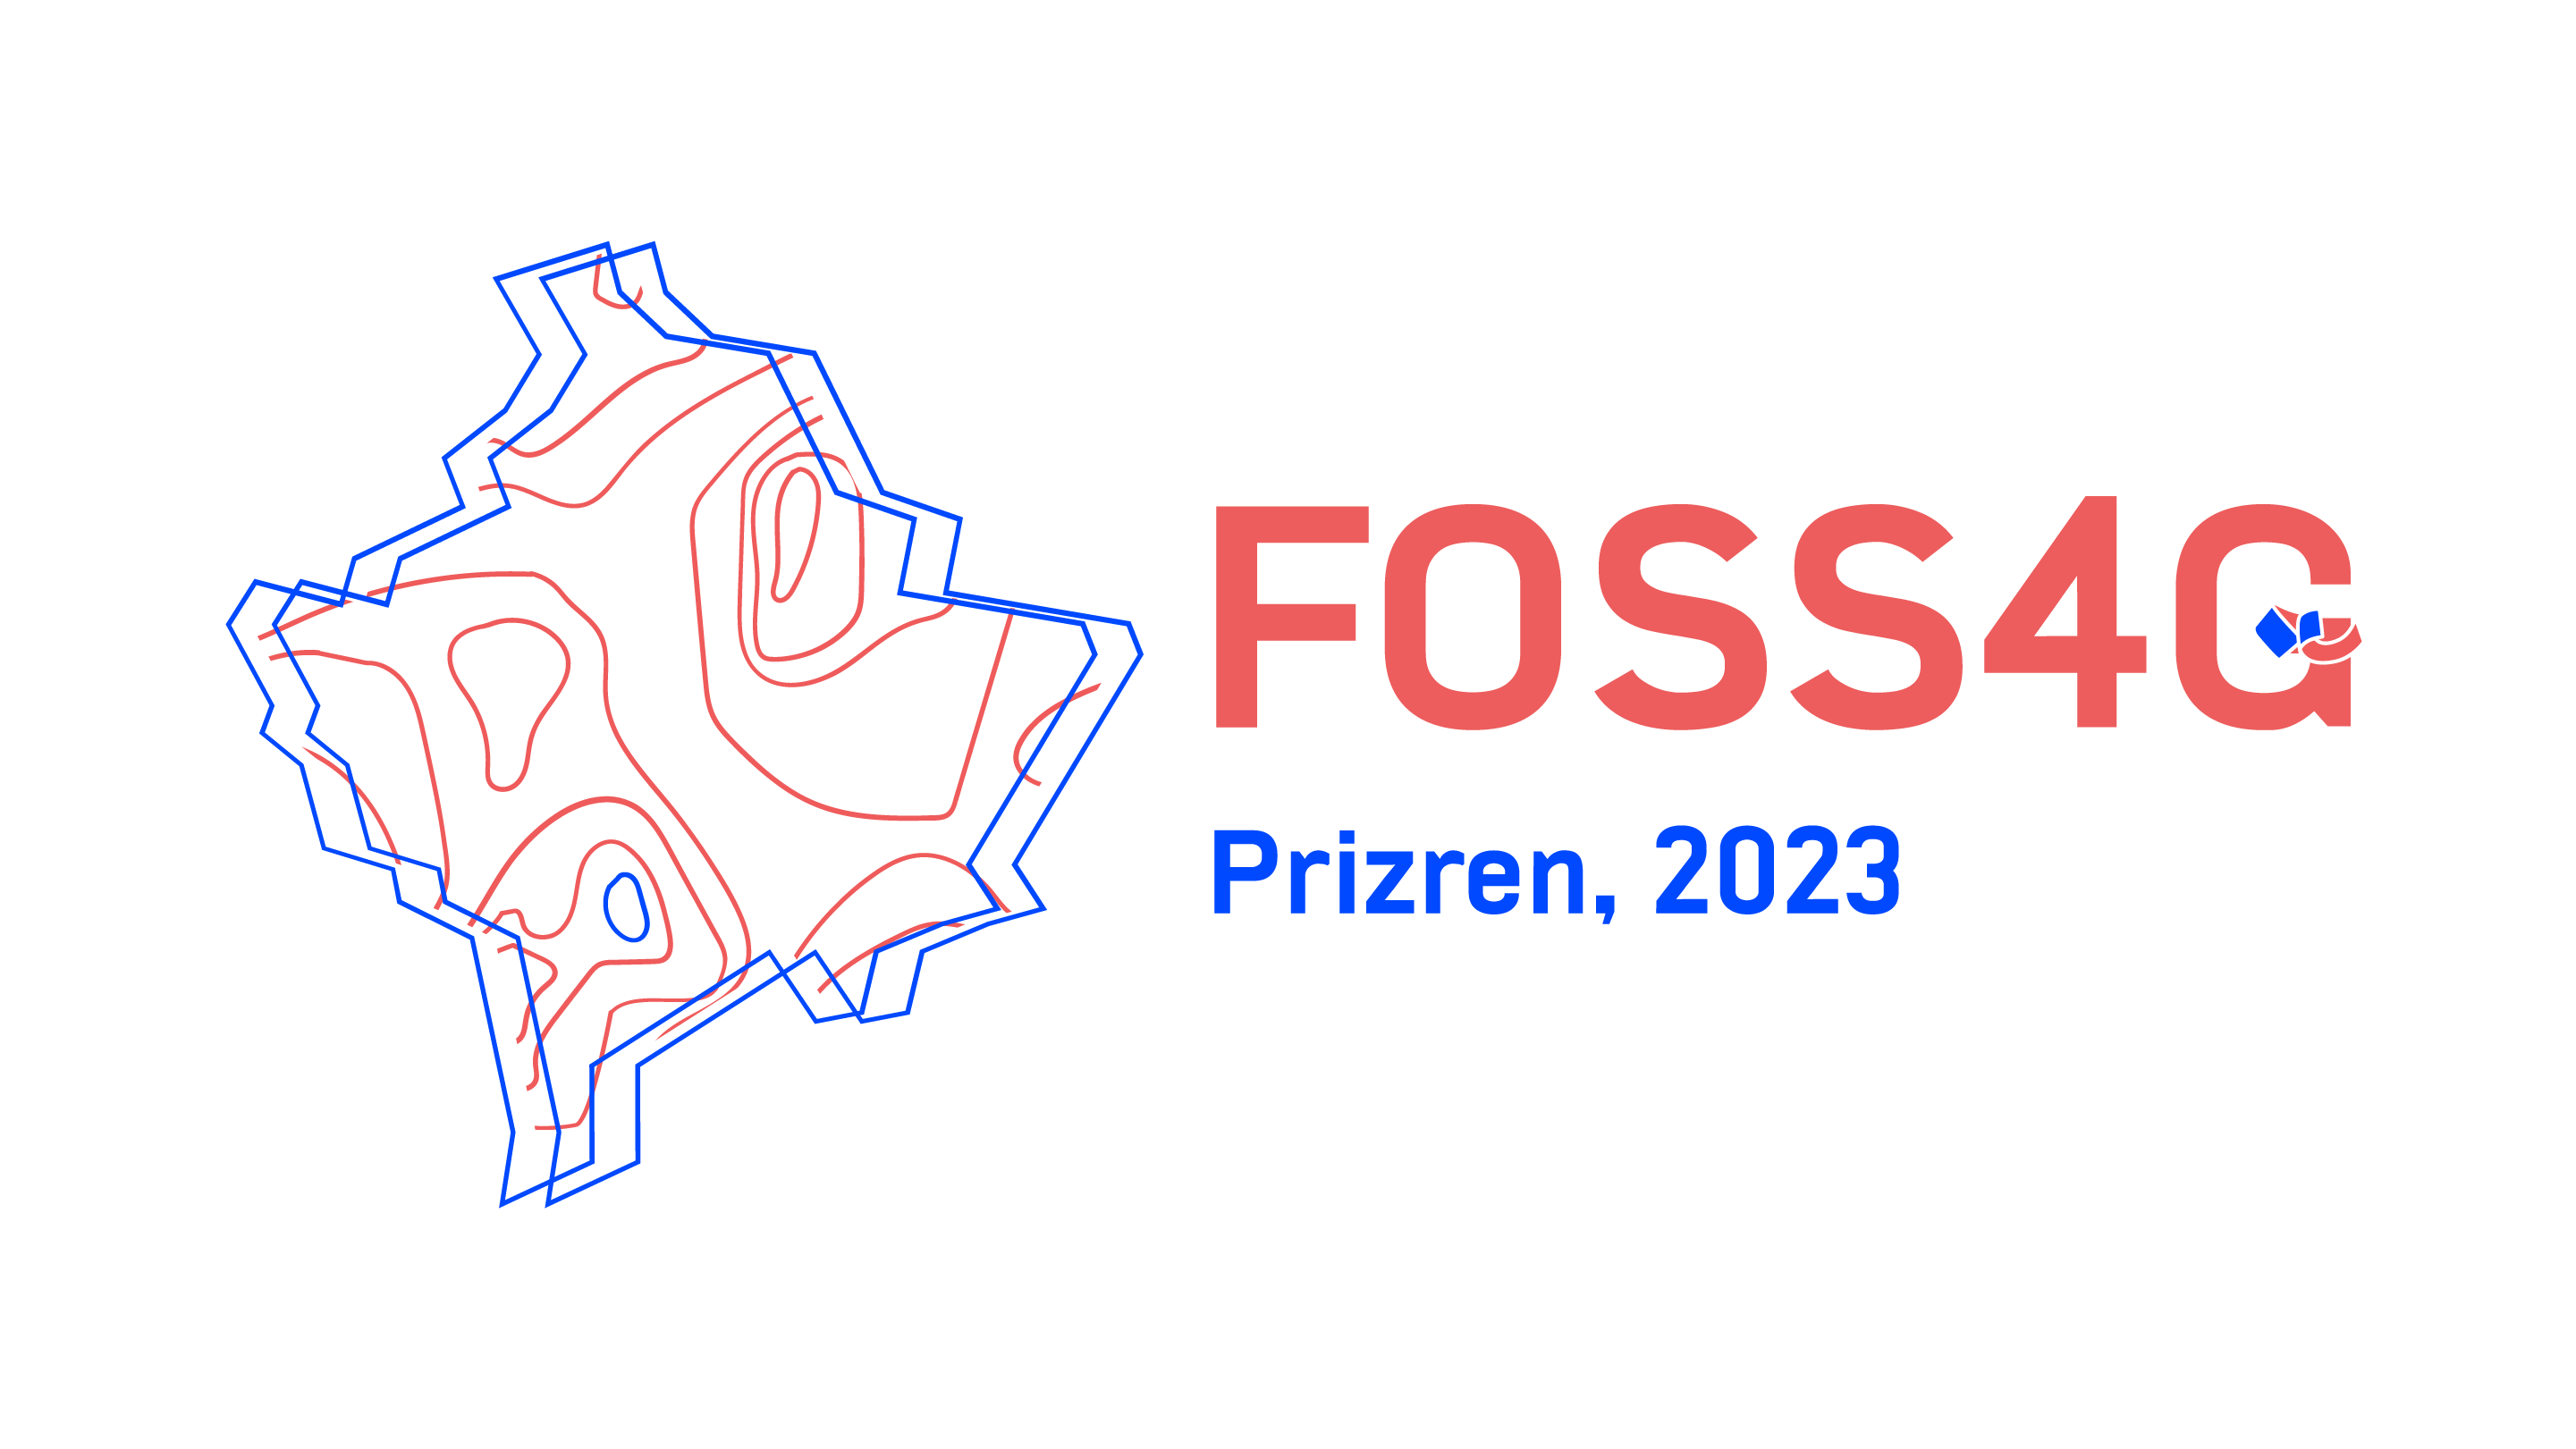 picture of a banner or logo from FOSS4G 2023